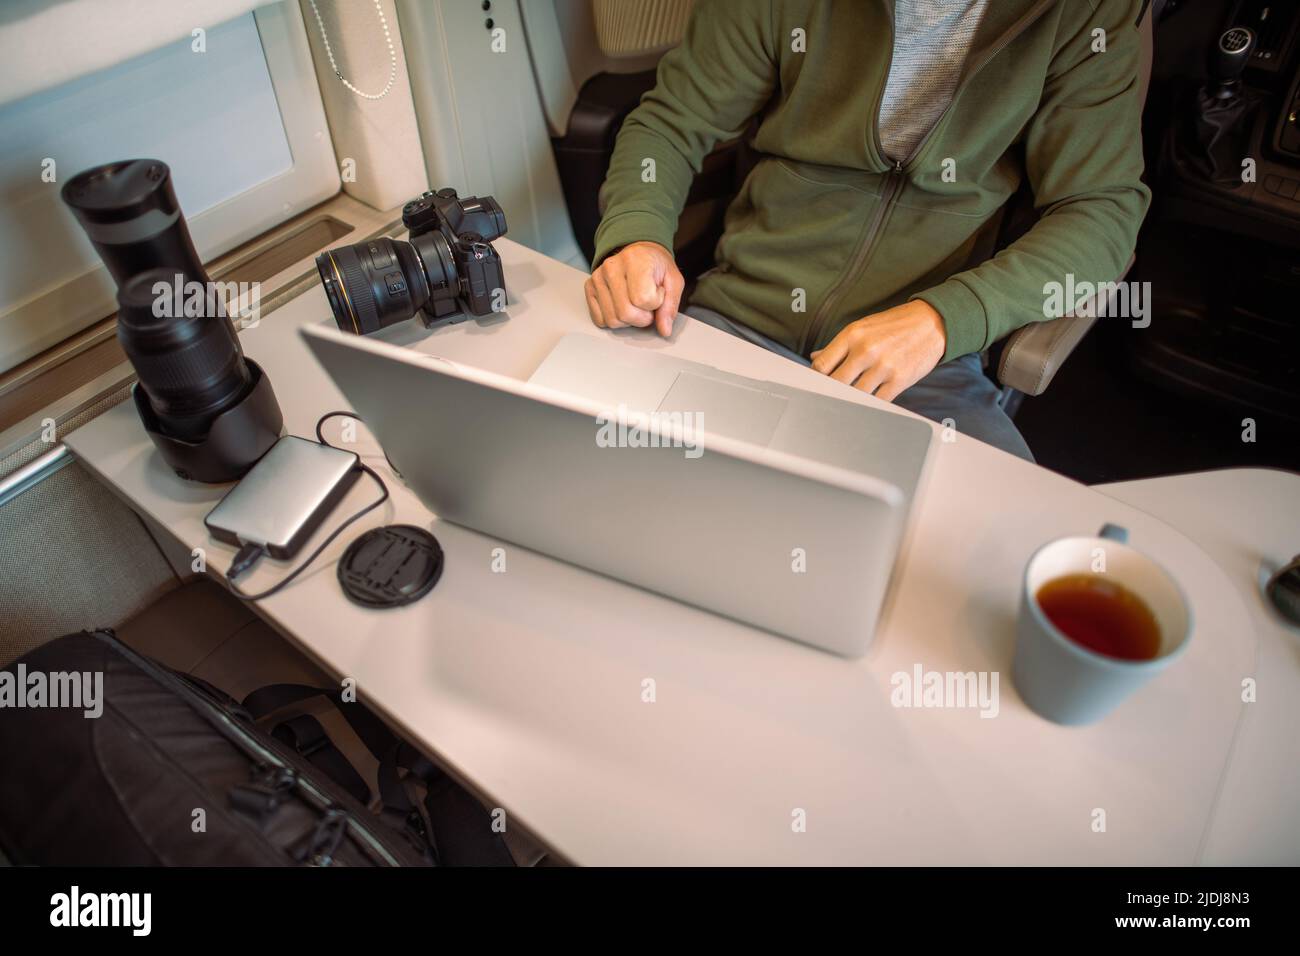 Travel Photographer Transferring His Latest Photos from His Photo Camera to the Laptop Computer Sitting in His Camper Van During the Overnight Stay. Stock Photo